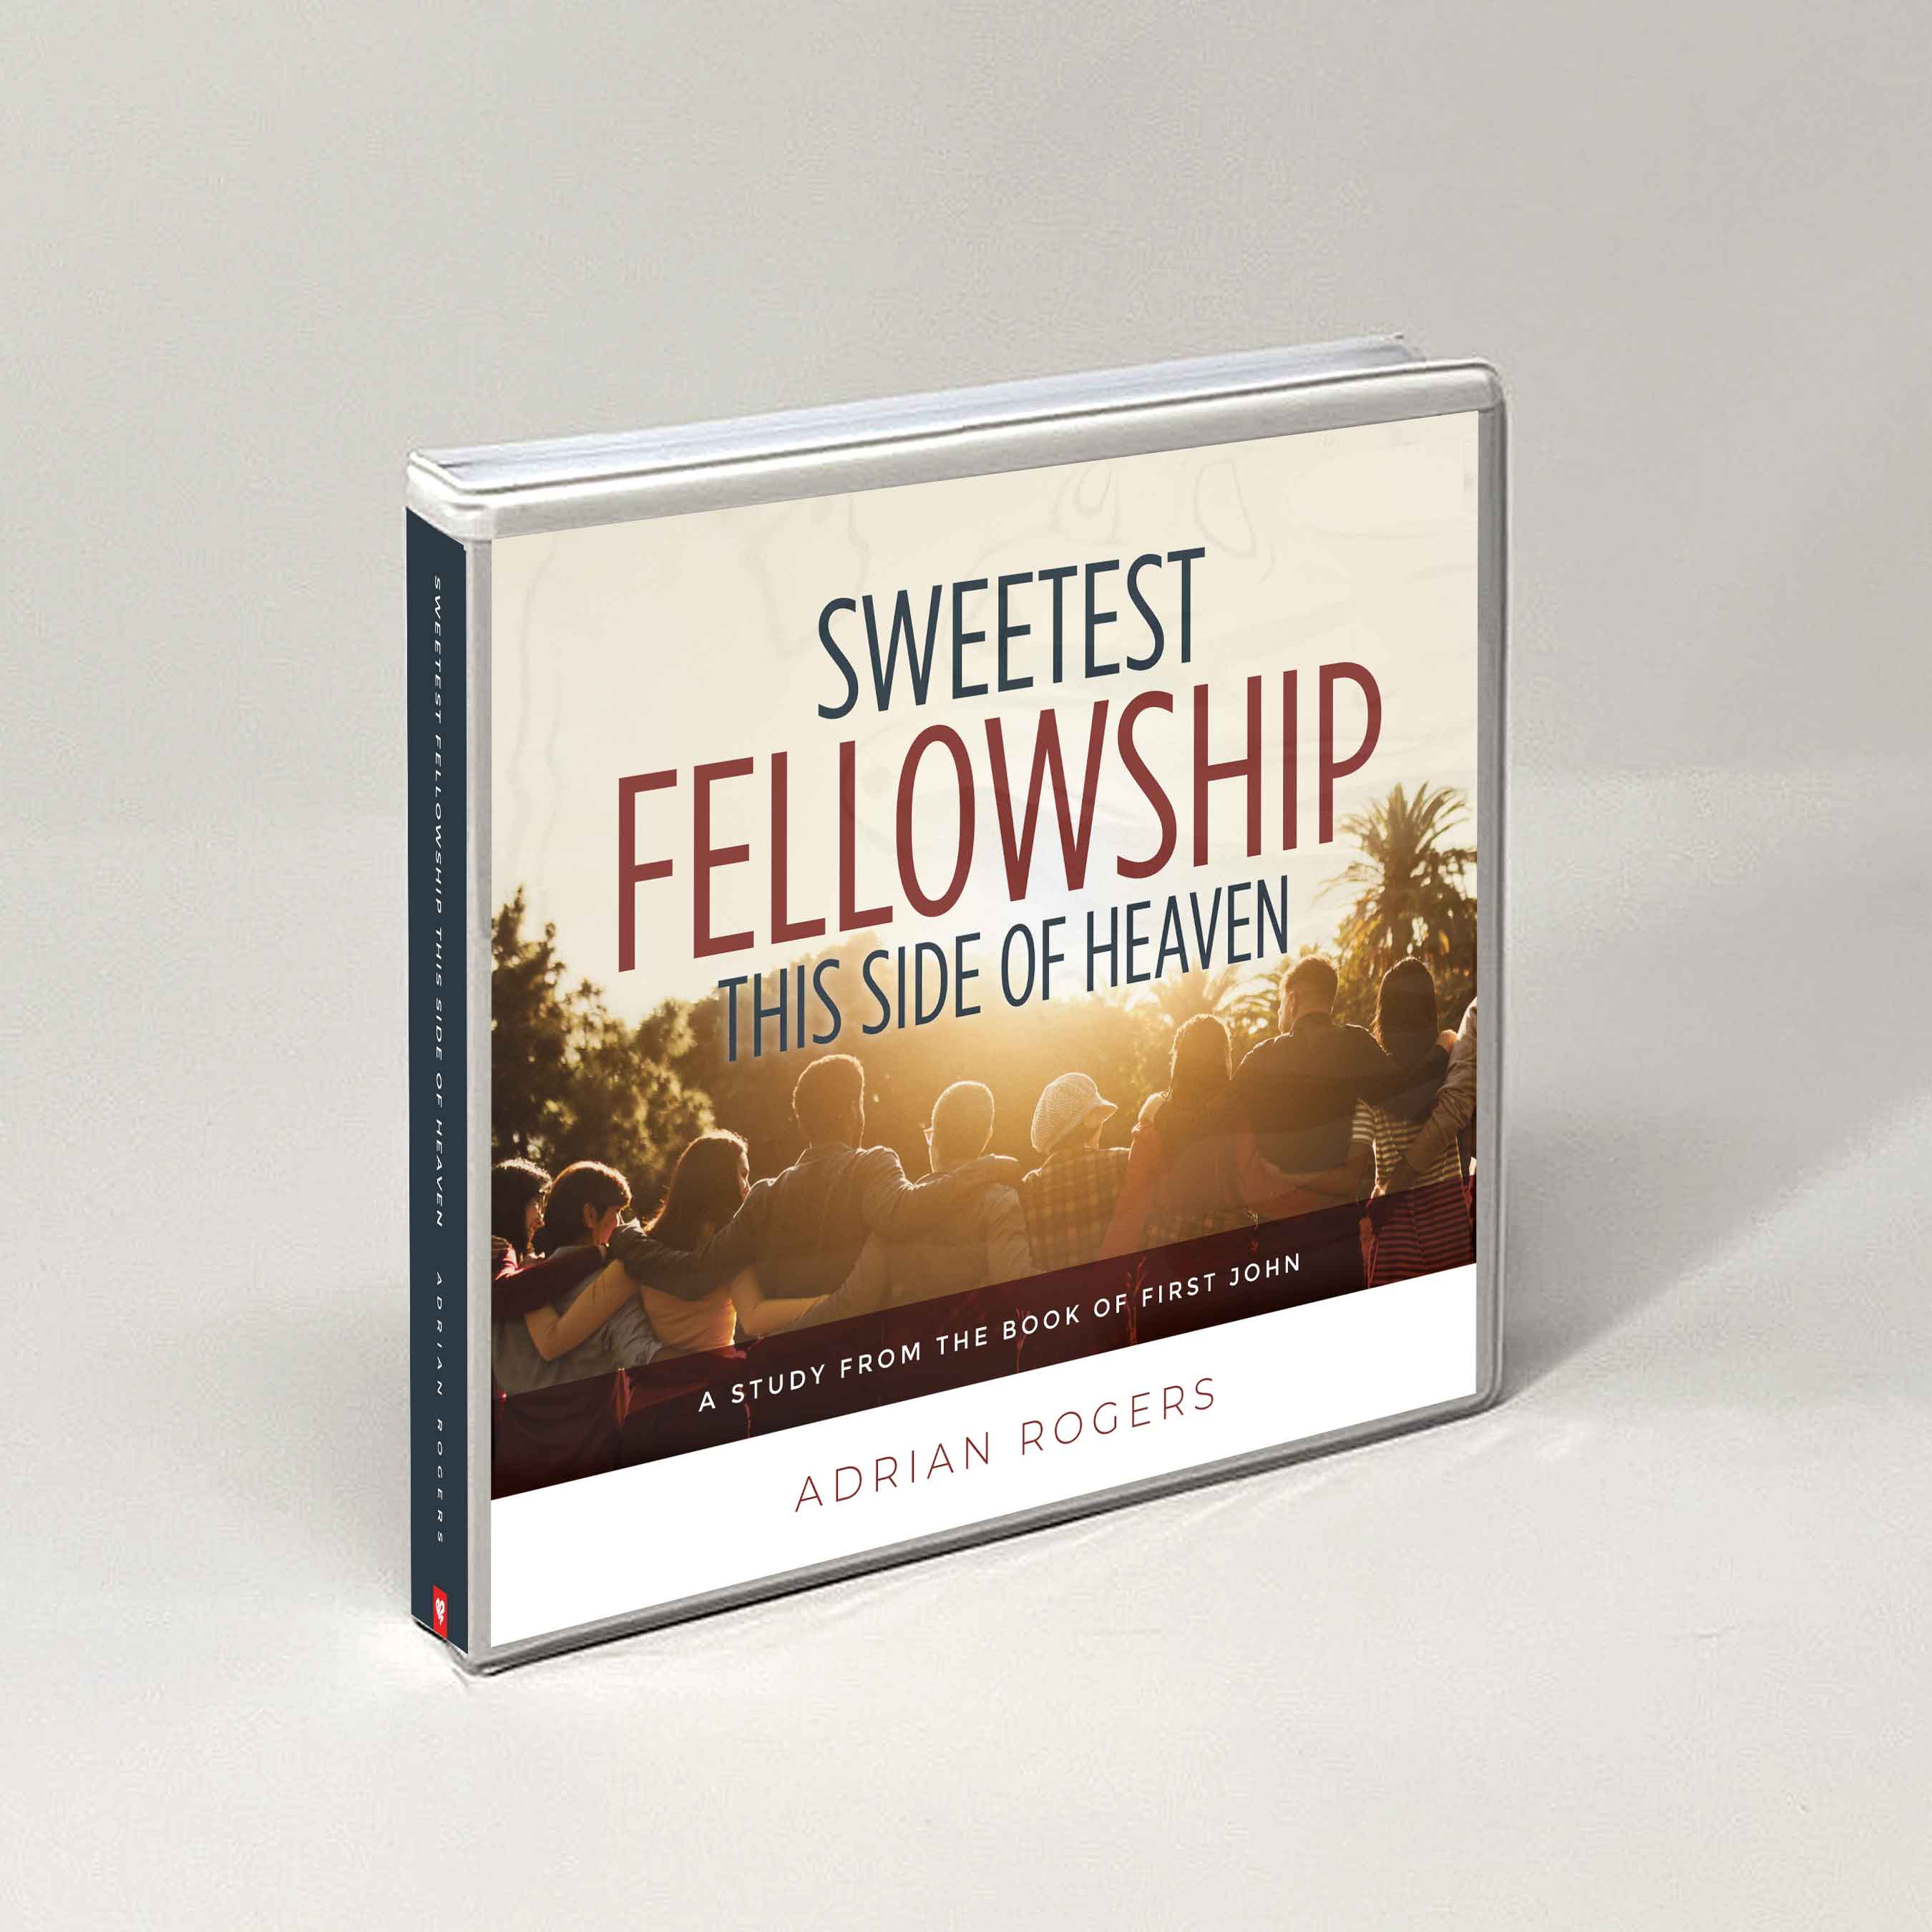 The Sweetest Fellowship this Side of Heaven Series